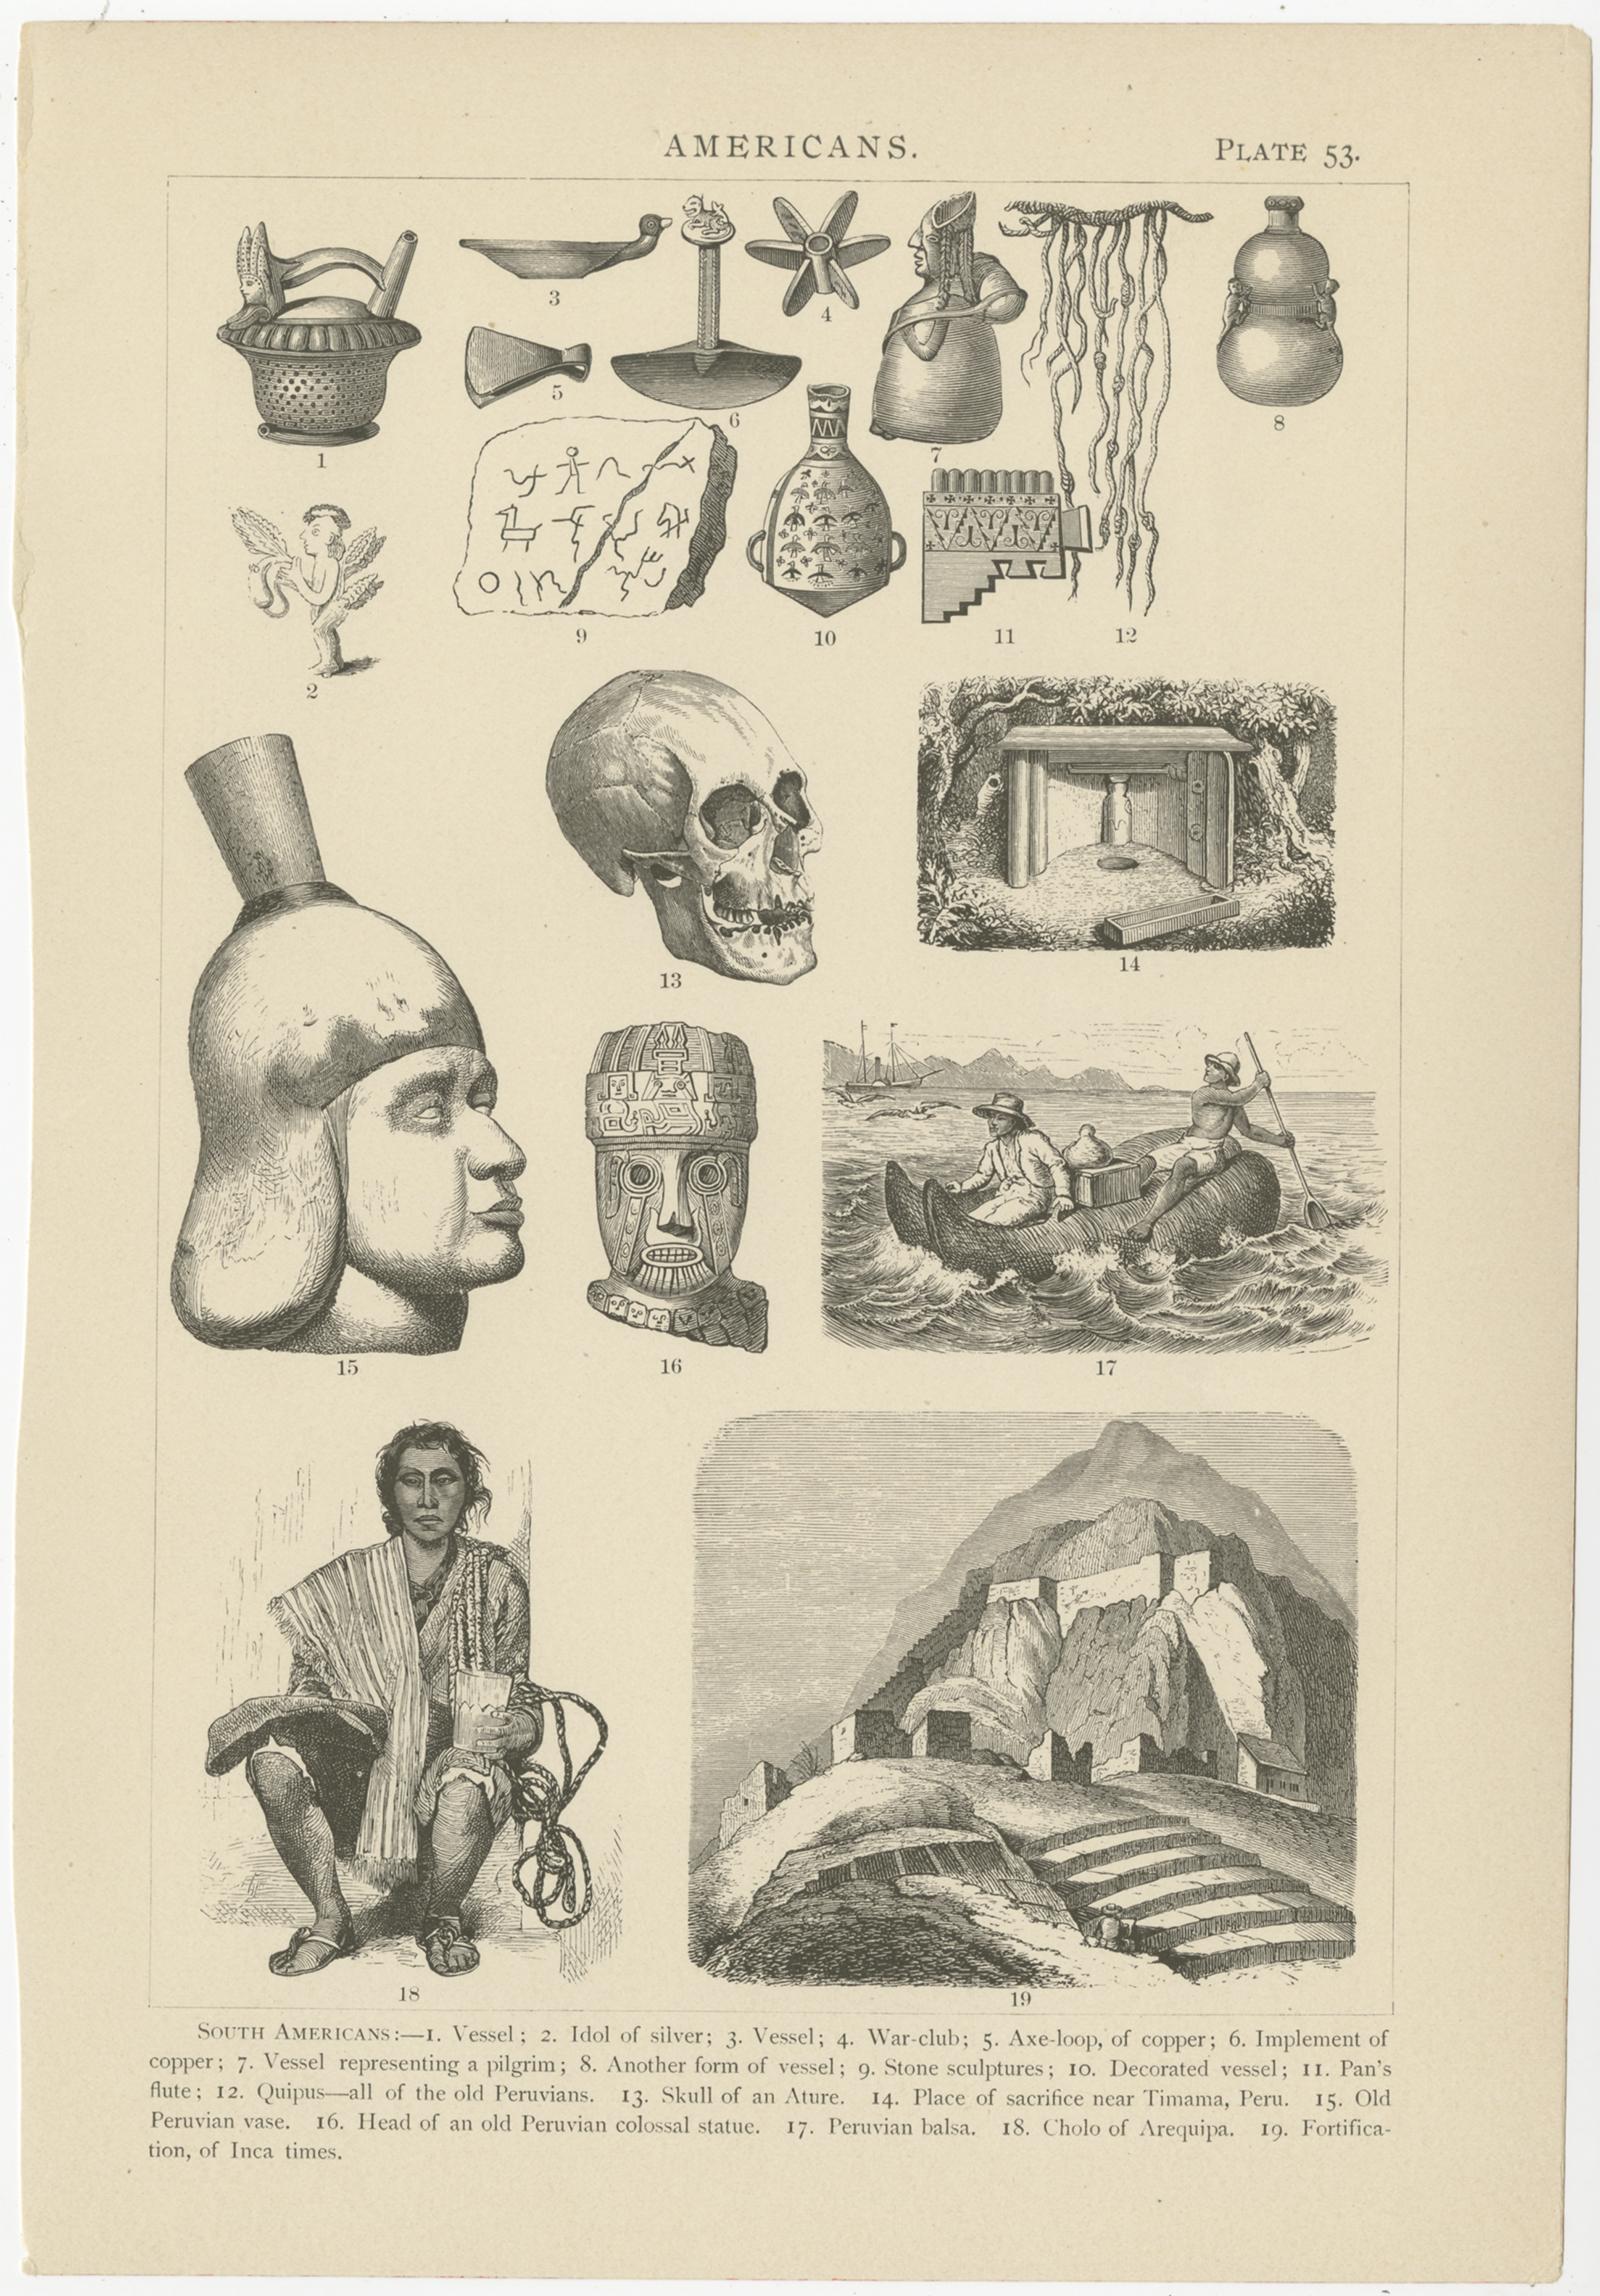 Set of ten antique prints depicting various scenes, figures, and objects of South America. These prints originate from 'Iconographic Encyclopaedia of the Arts and Sciences' by Johann Heck and Daniel Brinton.